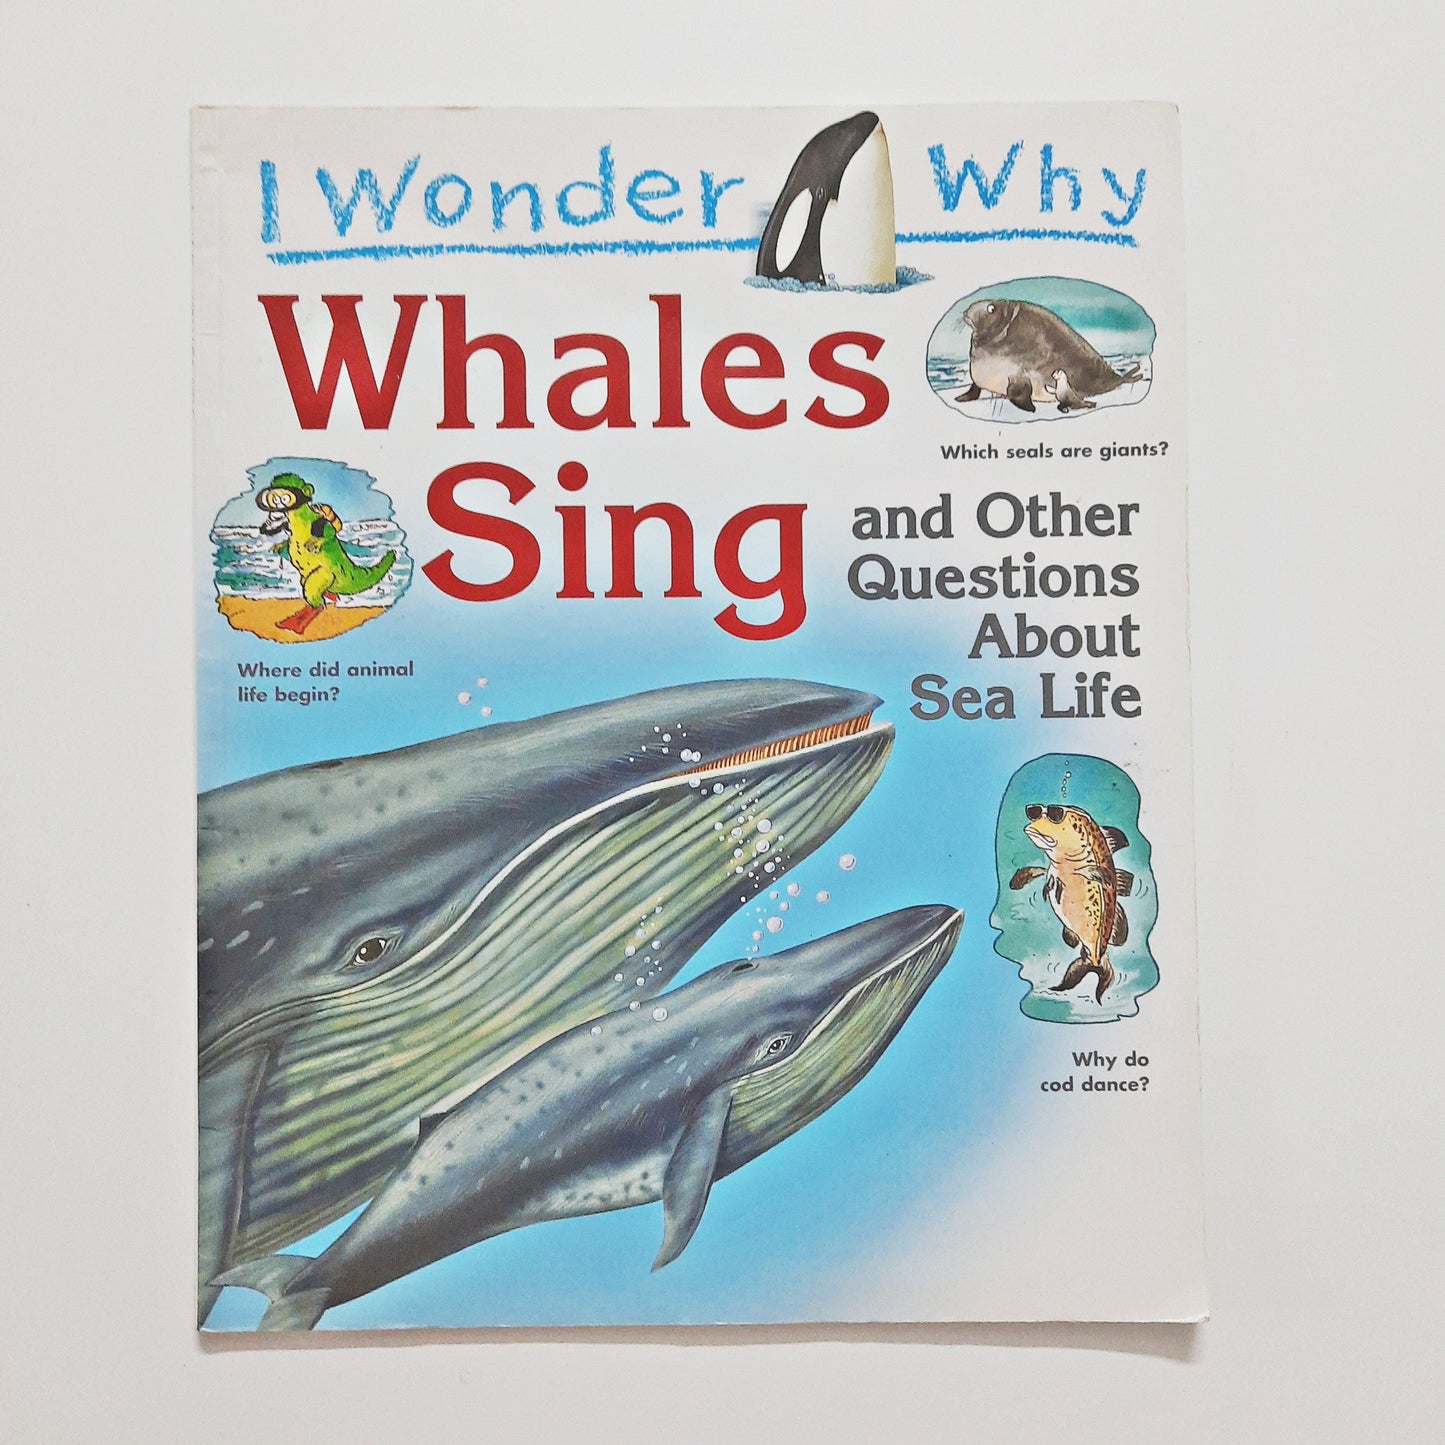 I wonder why Whales Sing